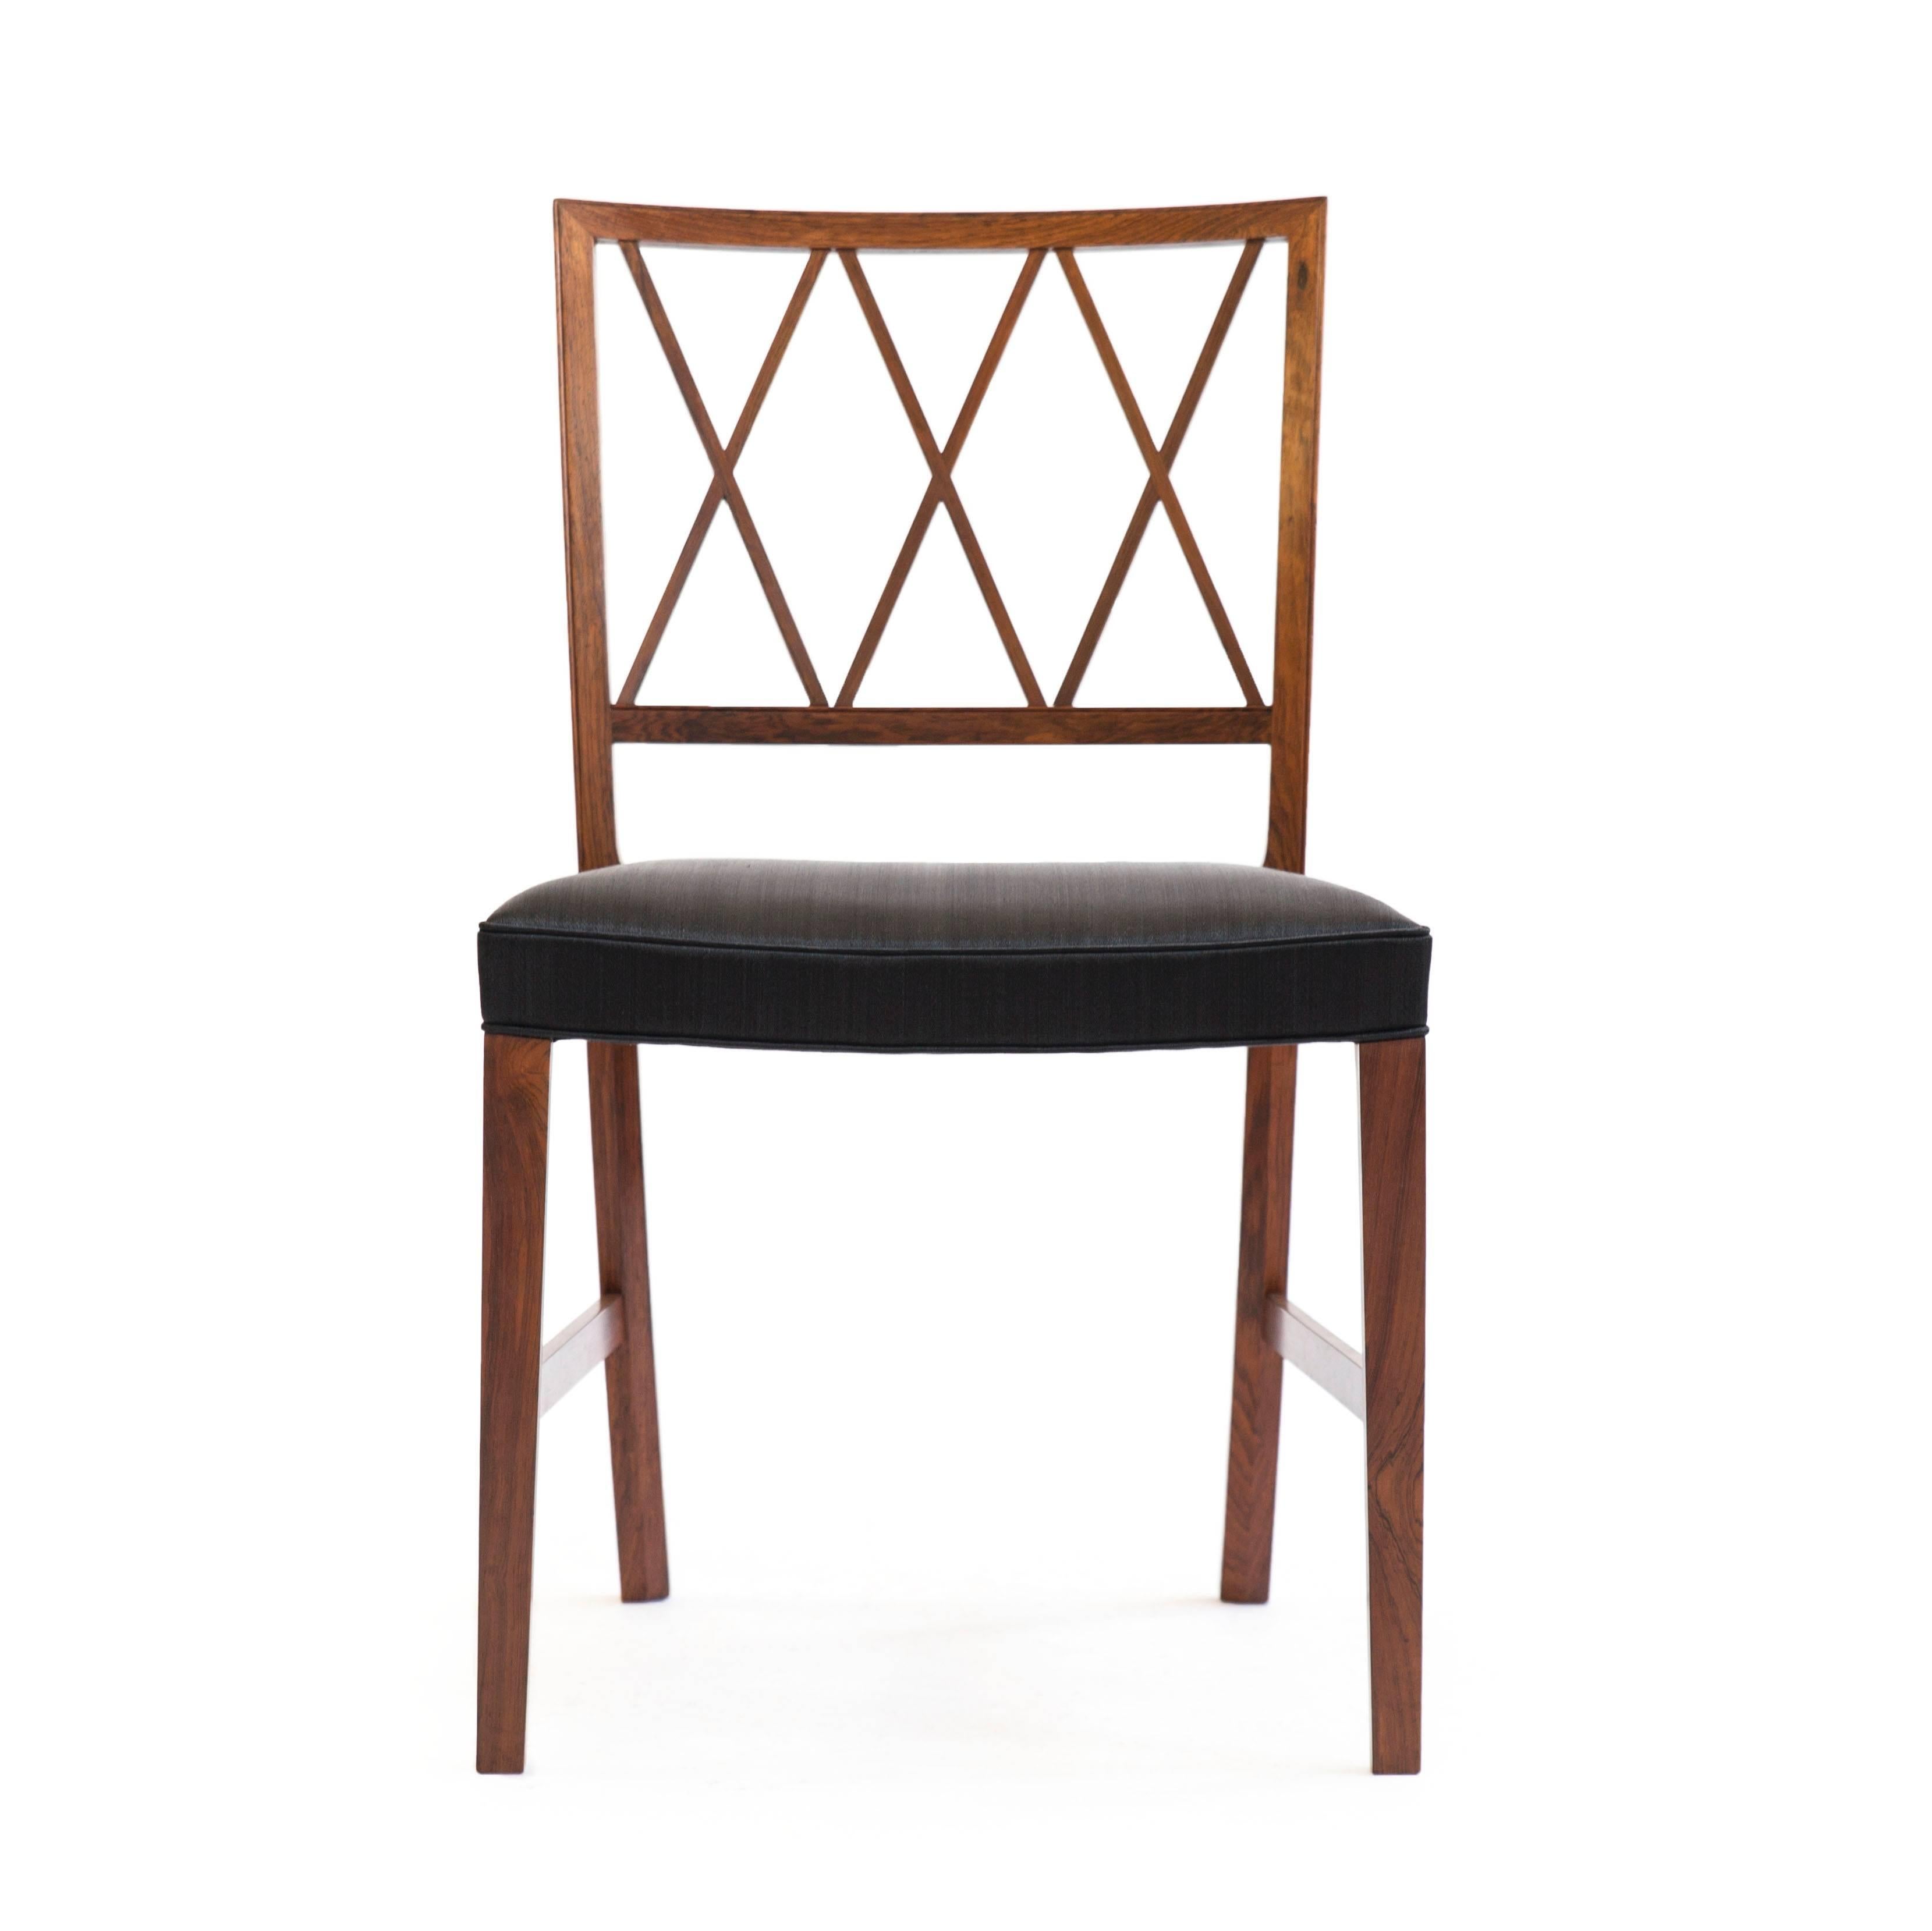 A set of four beautiful Ole Wanscher chairs. 

Frames of Brazilian rosewood, seats upholstered with black horsehairs. 

Executed by cabinetmaker A. J. Iversen, Denmark.